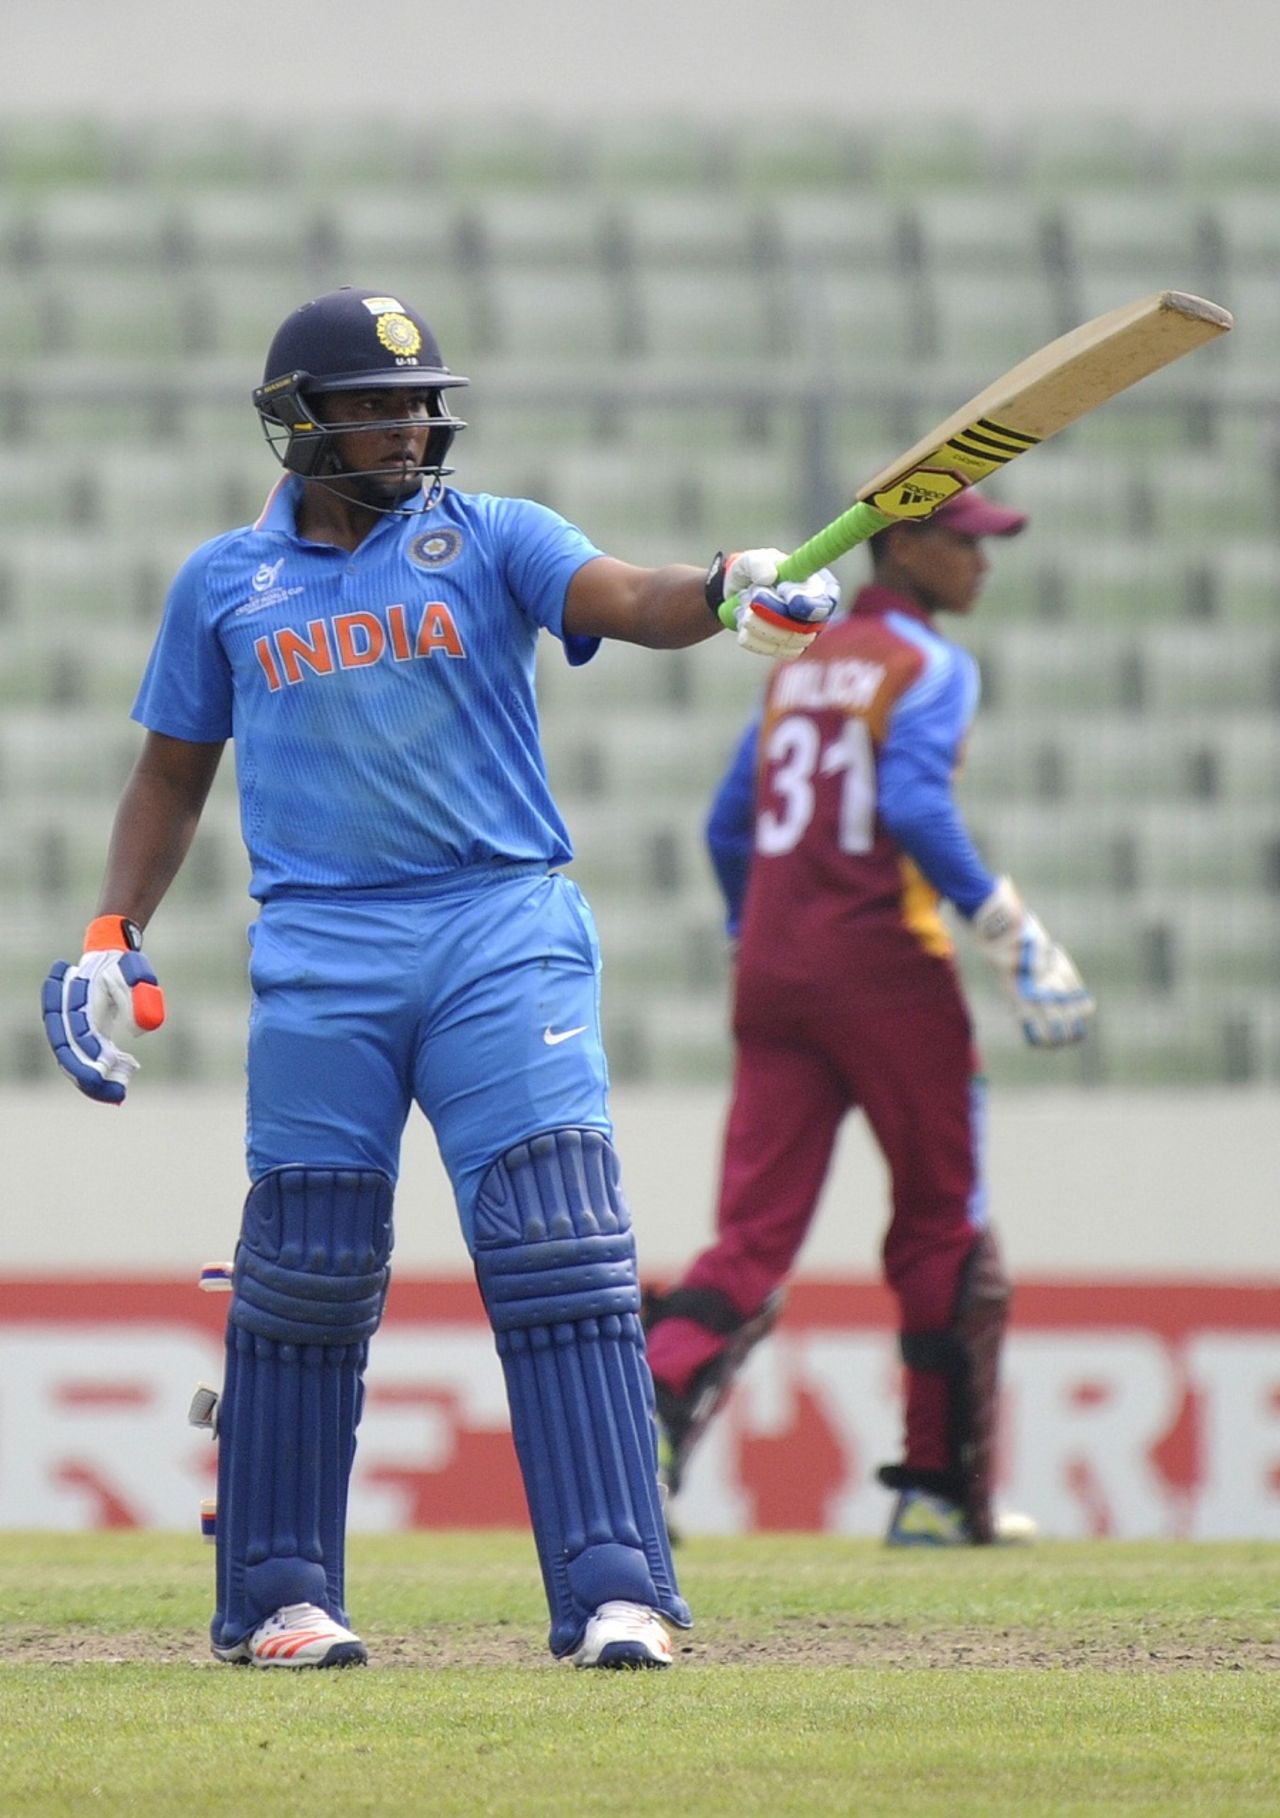 Sarfaraz Khan made a fighting fifty, India v West Indies, final, Under-19 World Cup, Mirpur, February 14, 2016